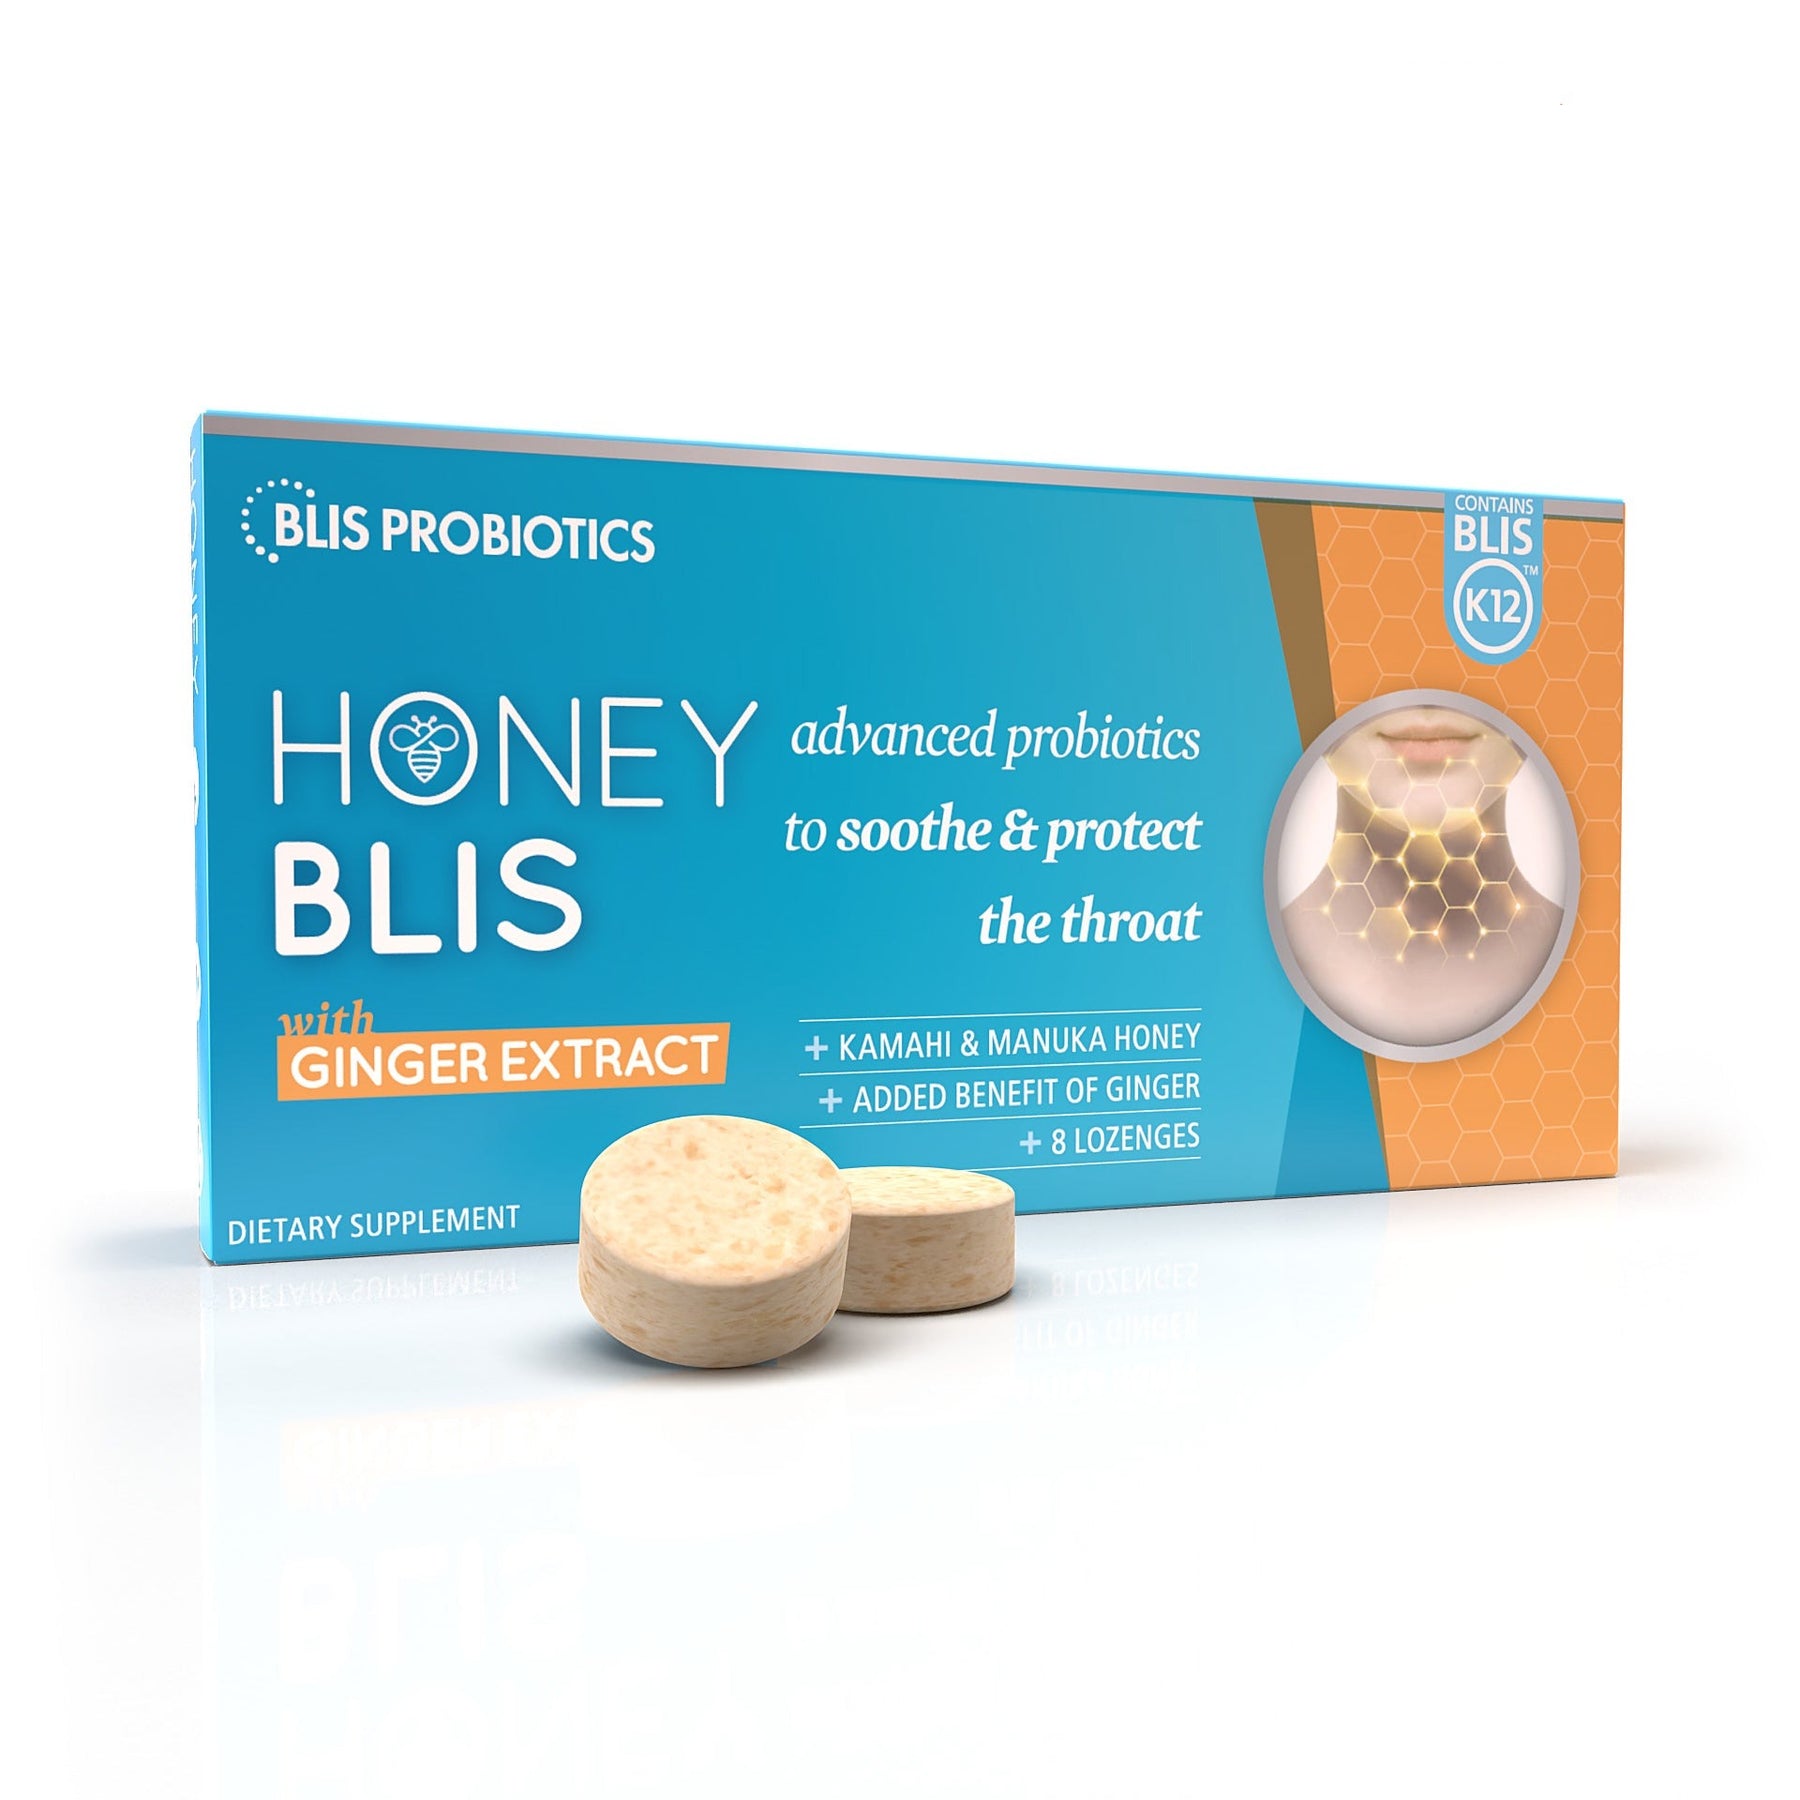 HoneyBLIS with Ginger Extract - Oral Probiotics - Soothe & Protect the throat